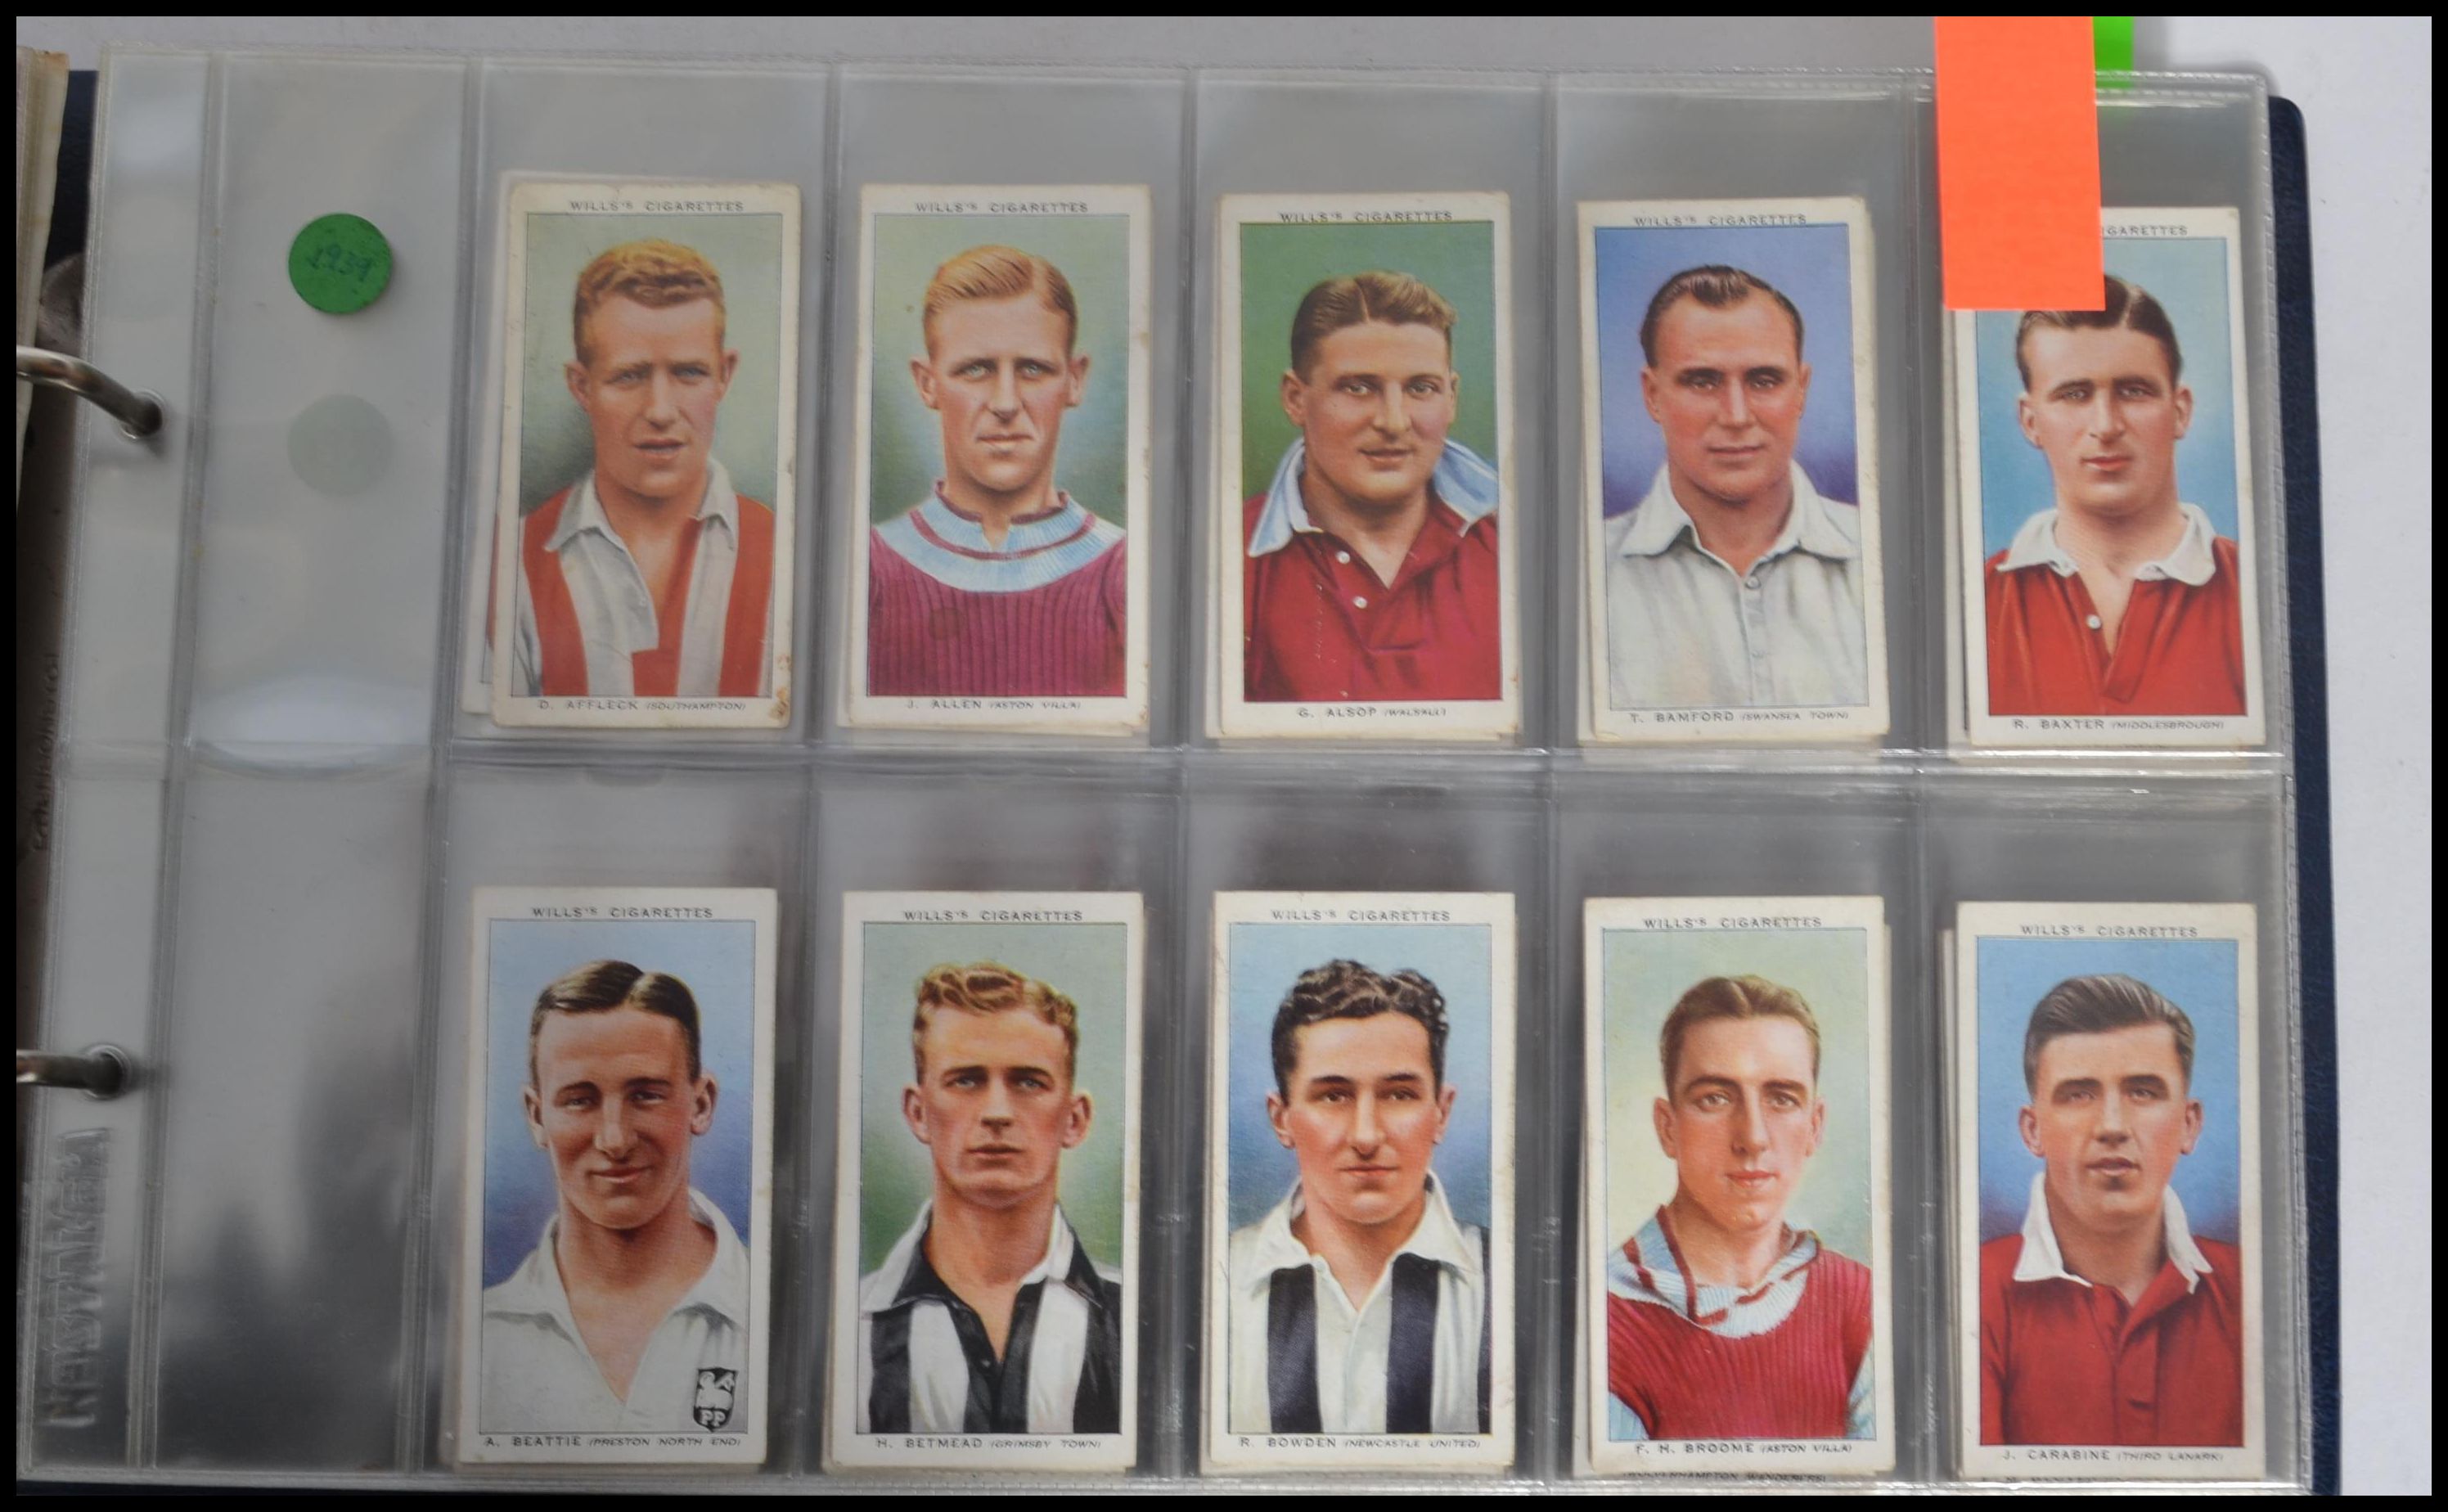 Cigarette cards; two albums of cigarette cards, all appearing to be full / complete sets (unless